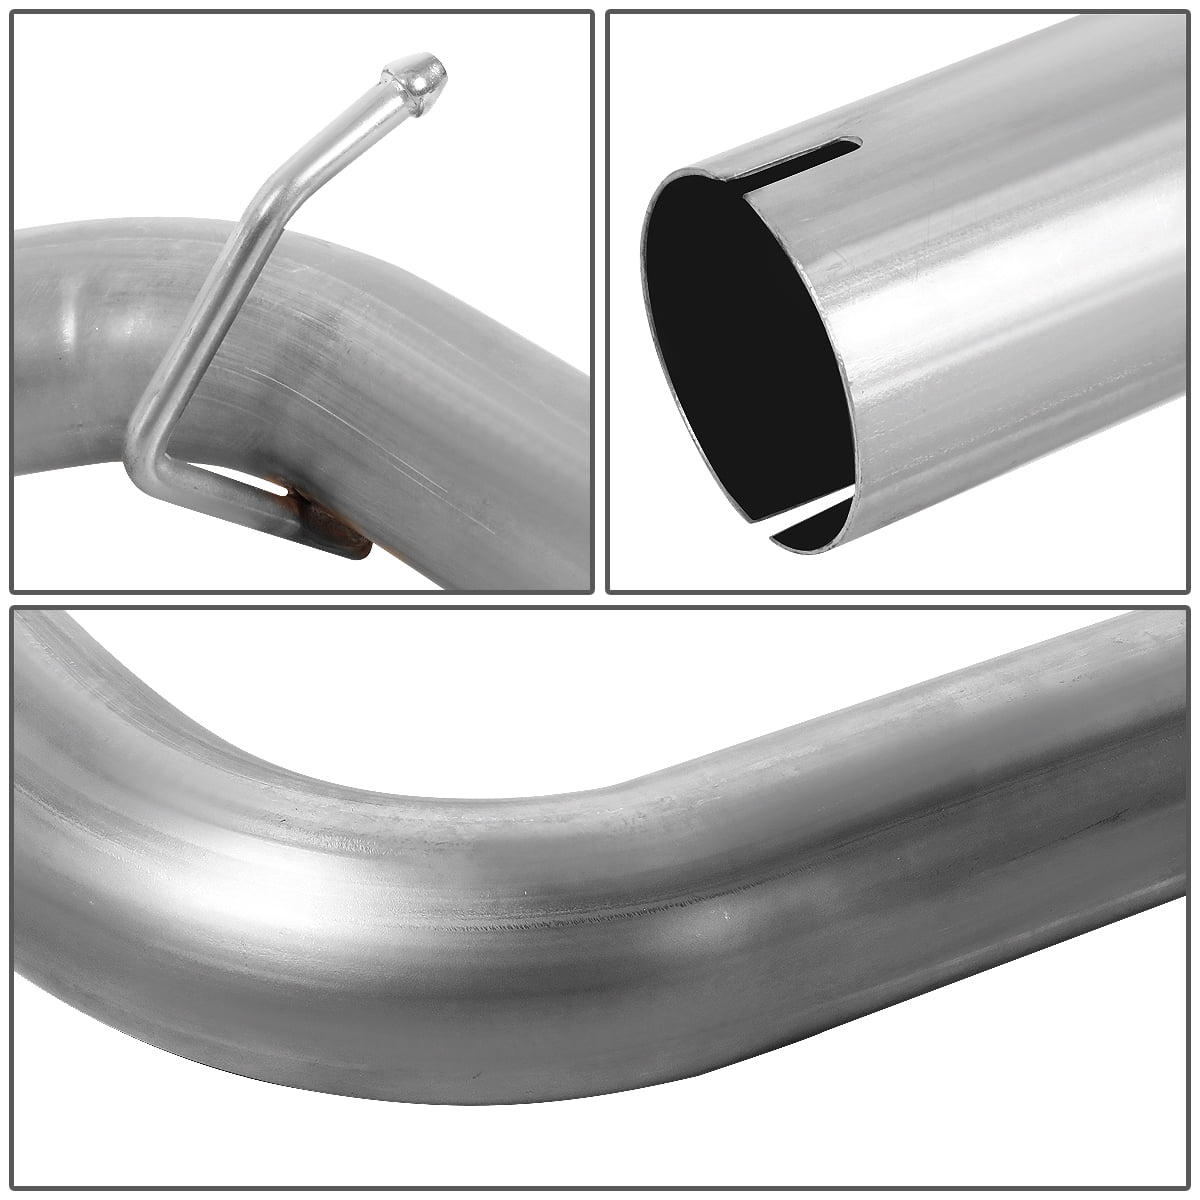 SOHC A588 For 00-05 Dodge Neon Catback Exhaust System 4.75 inches Burn Tip Muffler 